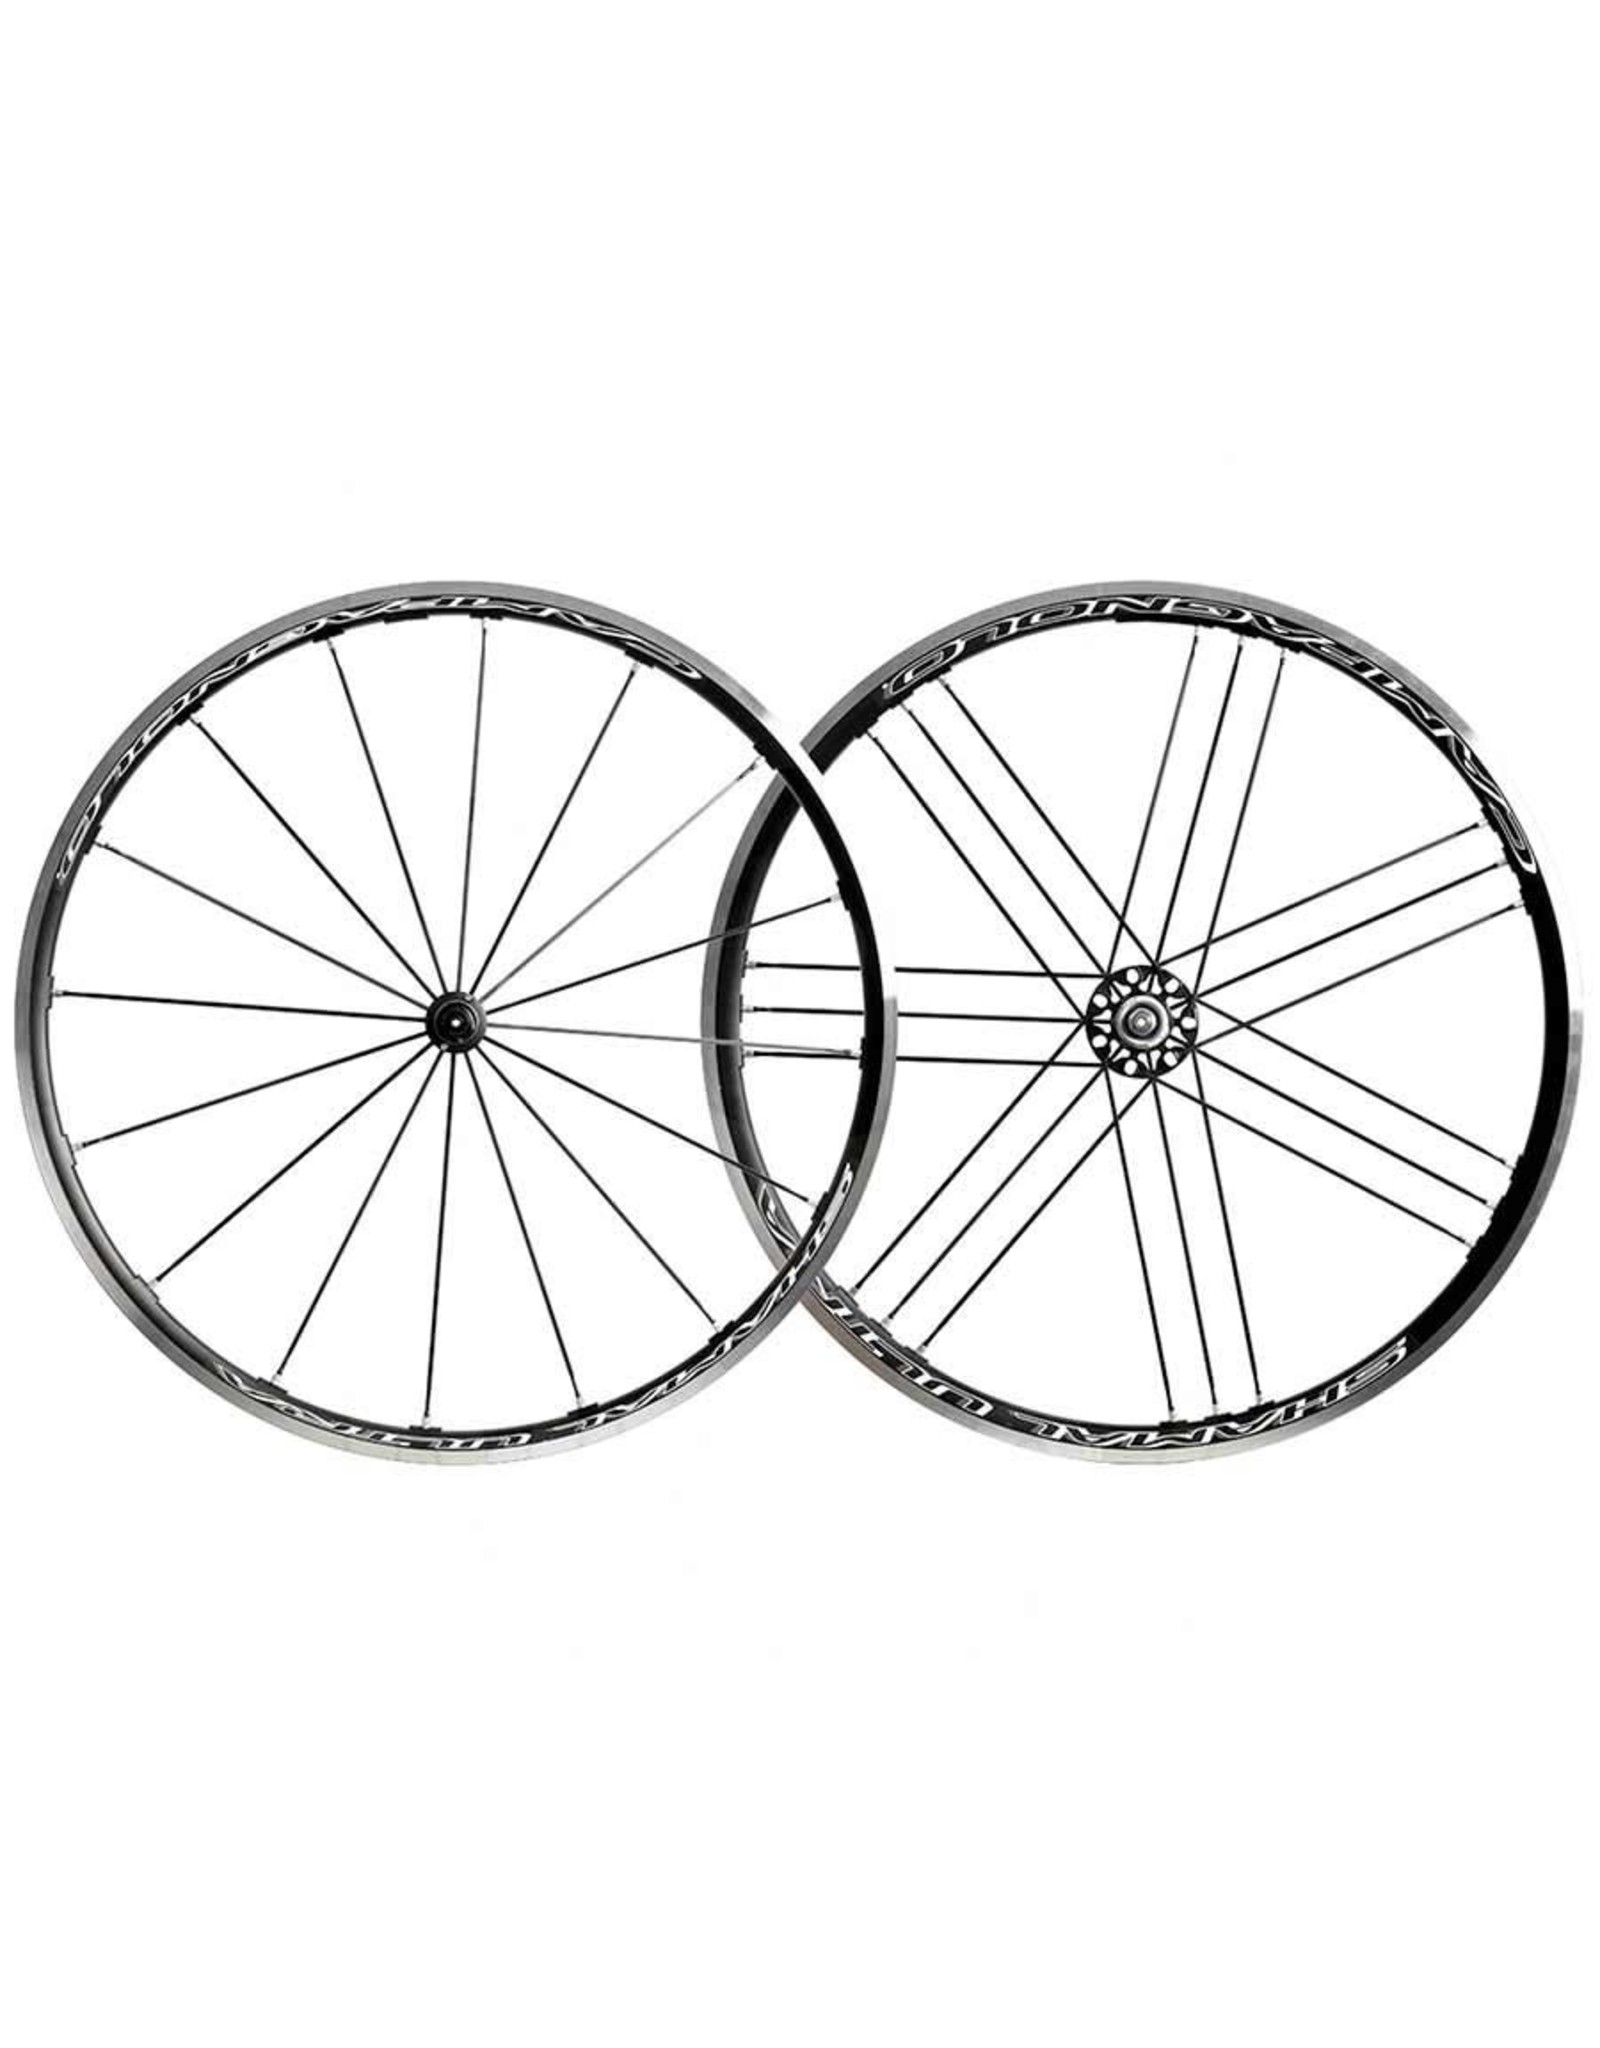 Campagnolo Wheelset Campagnolo Shamal Ultra C17 2-Way Fit 700c Tubeless Ready QR